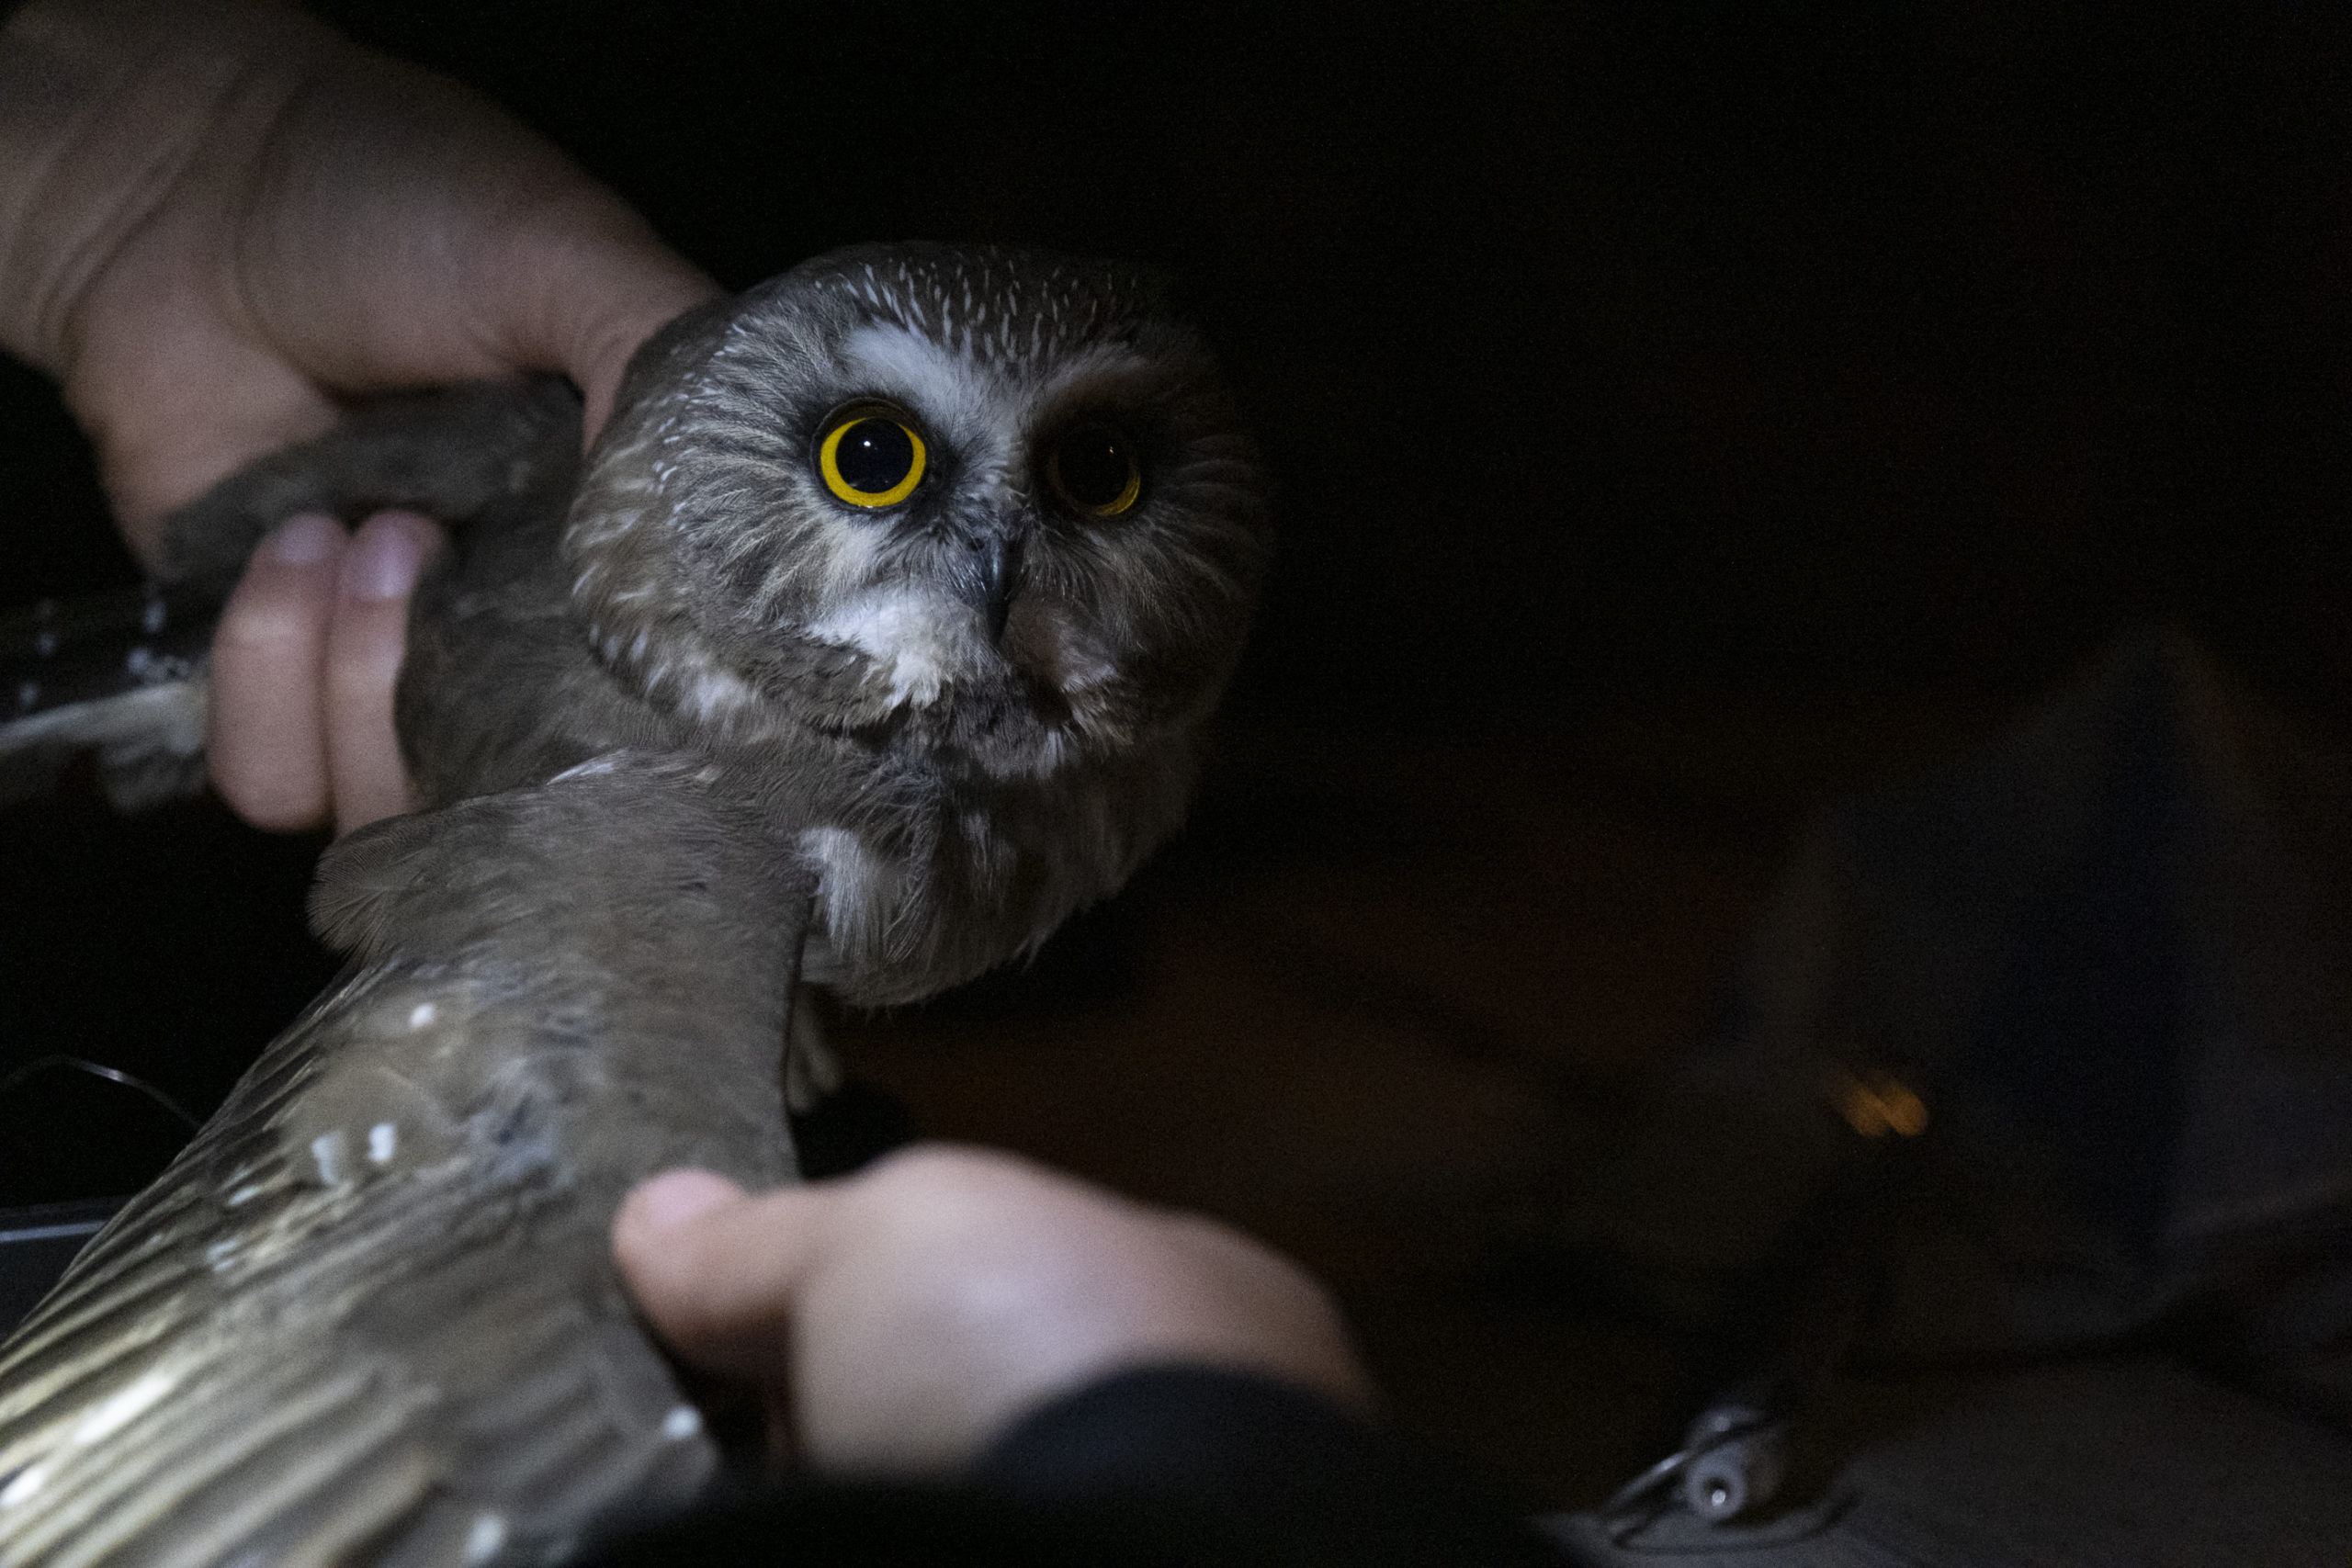 Mary Scofield, an avian researcher at the MPG Ranch, gently extends the wing of a northern saw-whet owl to measure its wingspan. Every captured northern saw-whet owl is measured for weight, beak and wing length, wear of feathers, visible injures and estimated age.